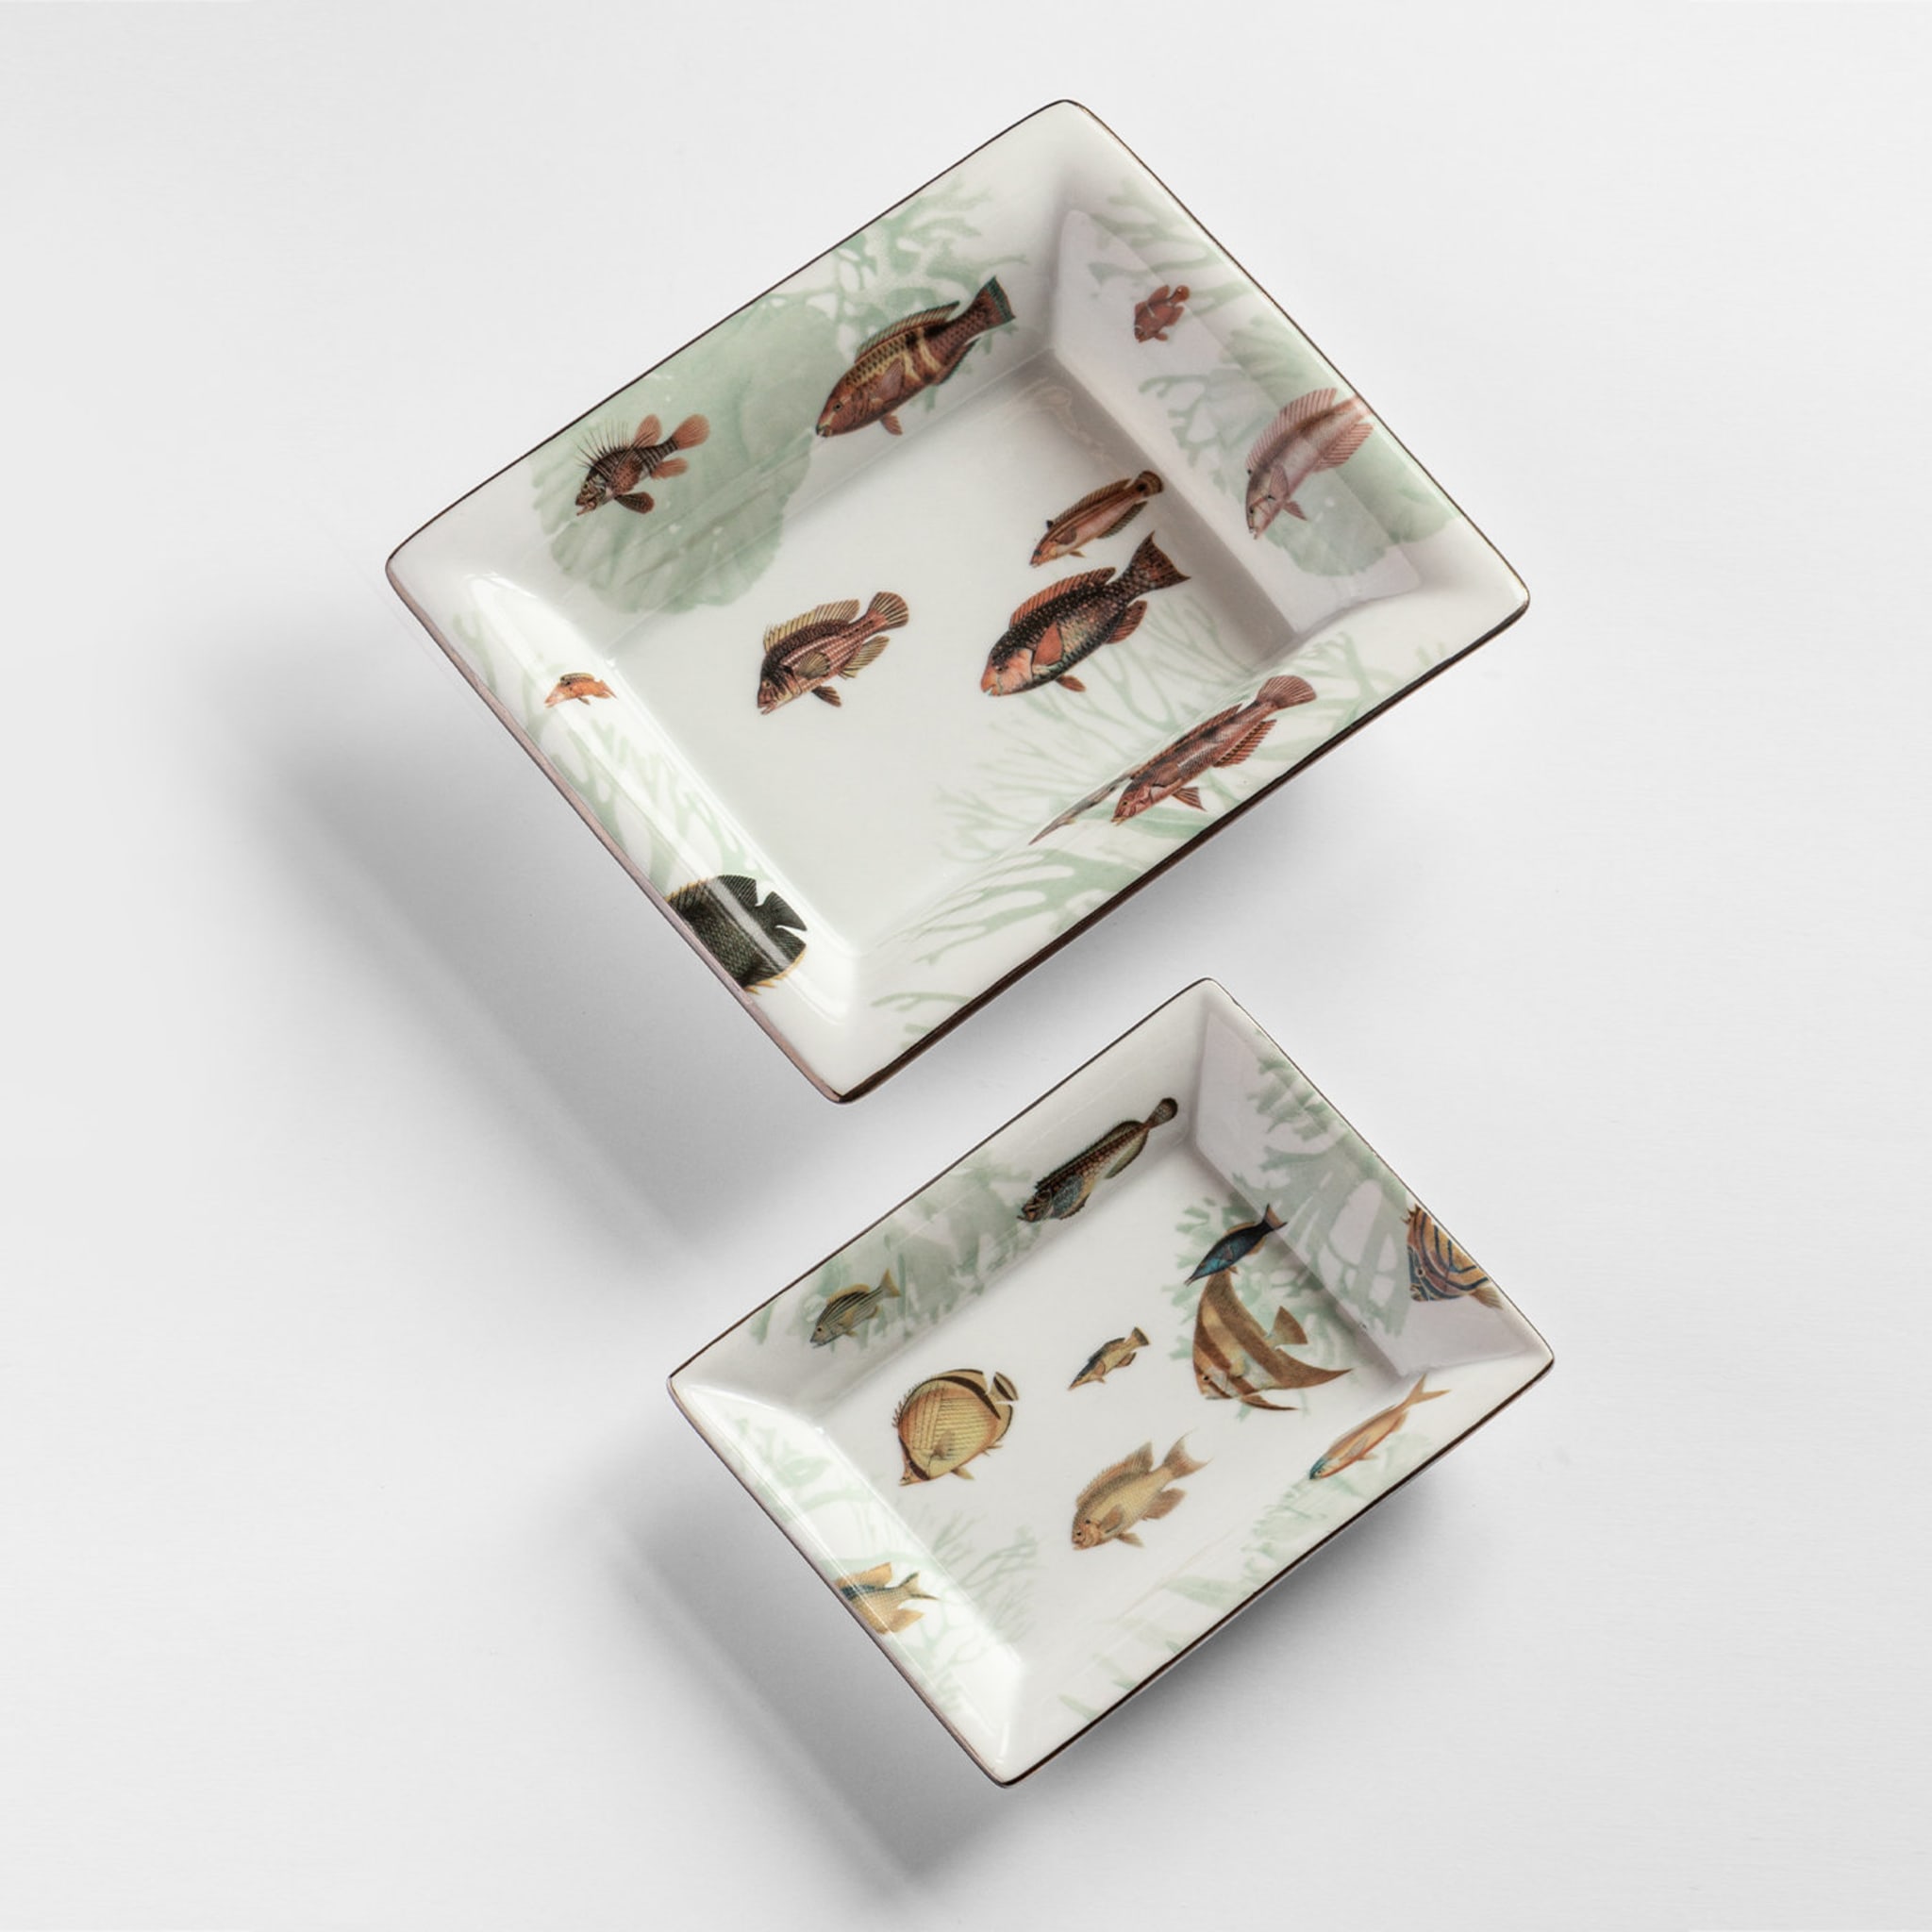 Amami Set Of Porcelain Ashtray And Vide-Poche With Tropical Fish - Alternative view 1